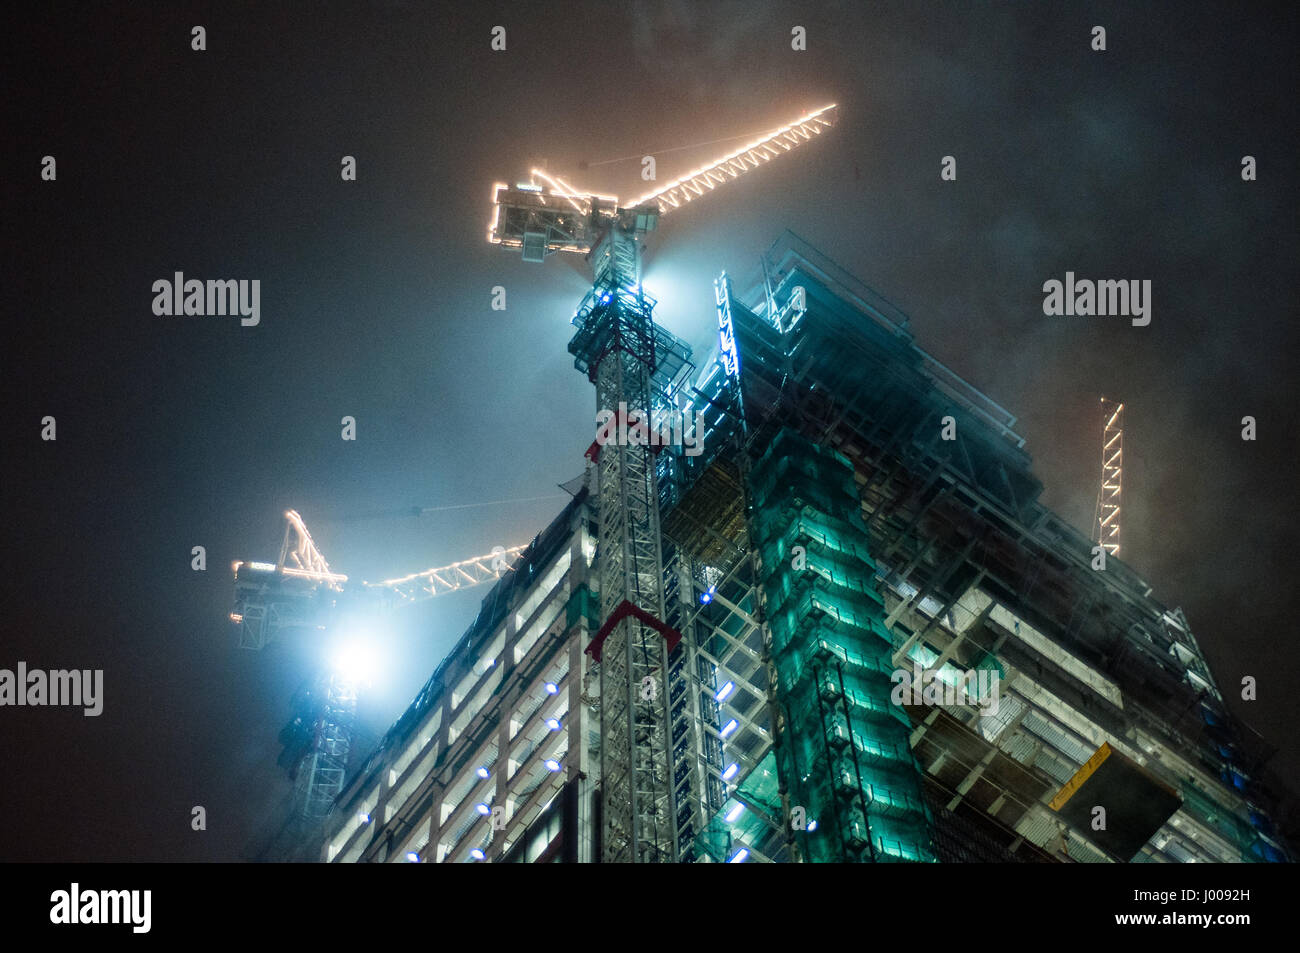 London, England, UK - December 16, 2009: Winter mist drifts across the Heron Tower skyscraper under construction in the City of London. Stock Photo